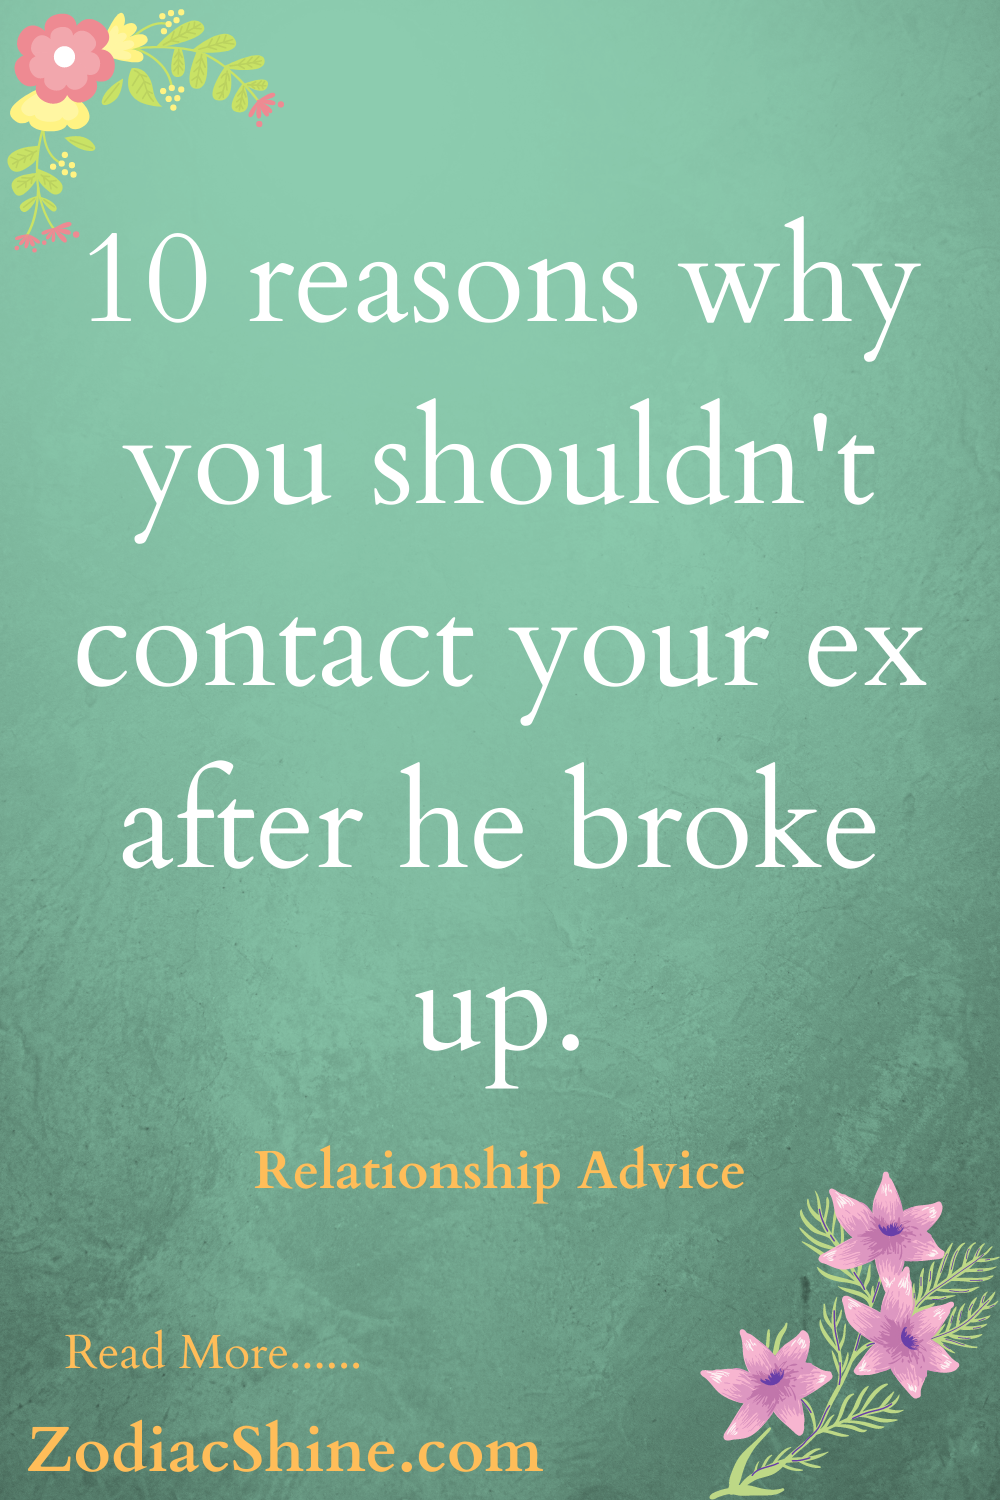 10 reasons why you shouldn't contact your ex after he broke up.